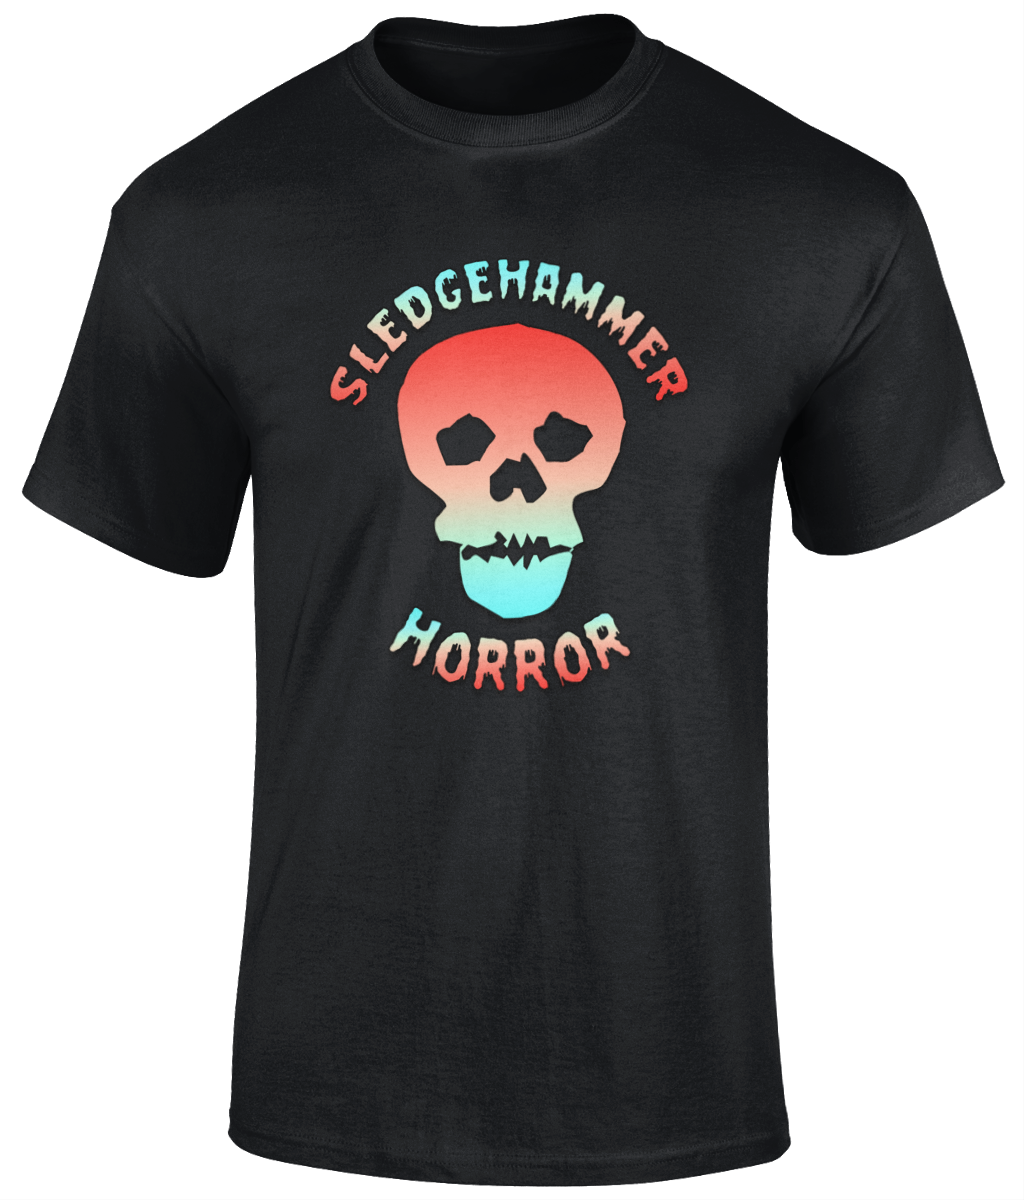 POISON VALLEY CLOTHING "SLEDGEHAMMER HORROR logo" unisex t shirt  Material: 100% cotton  Seamless twin needle collar. Taped neck and shoulders. Tubular body. Twin needle sleeves and hem. Available in Black or White Sizes small to 5XL